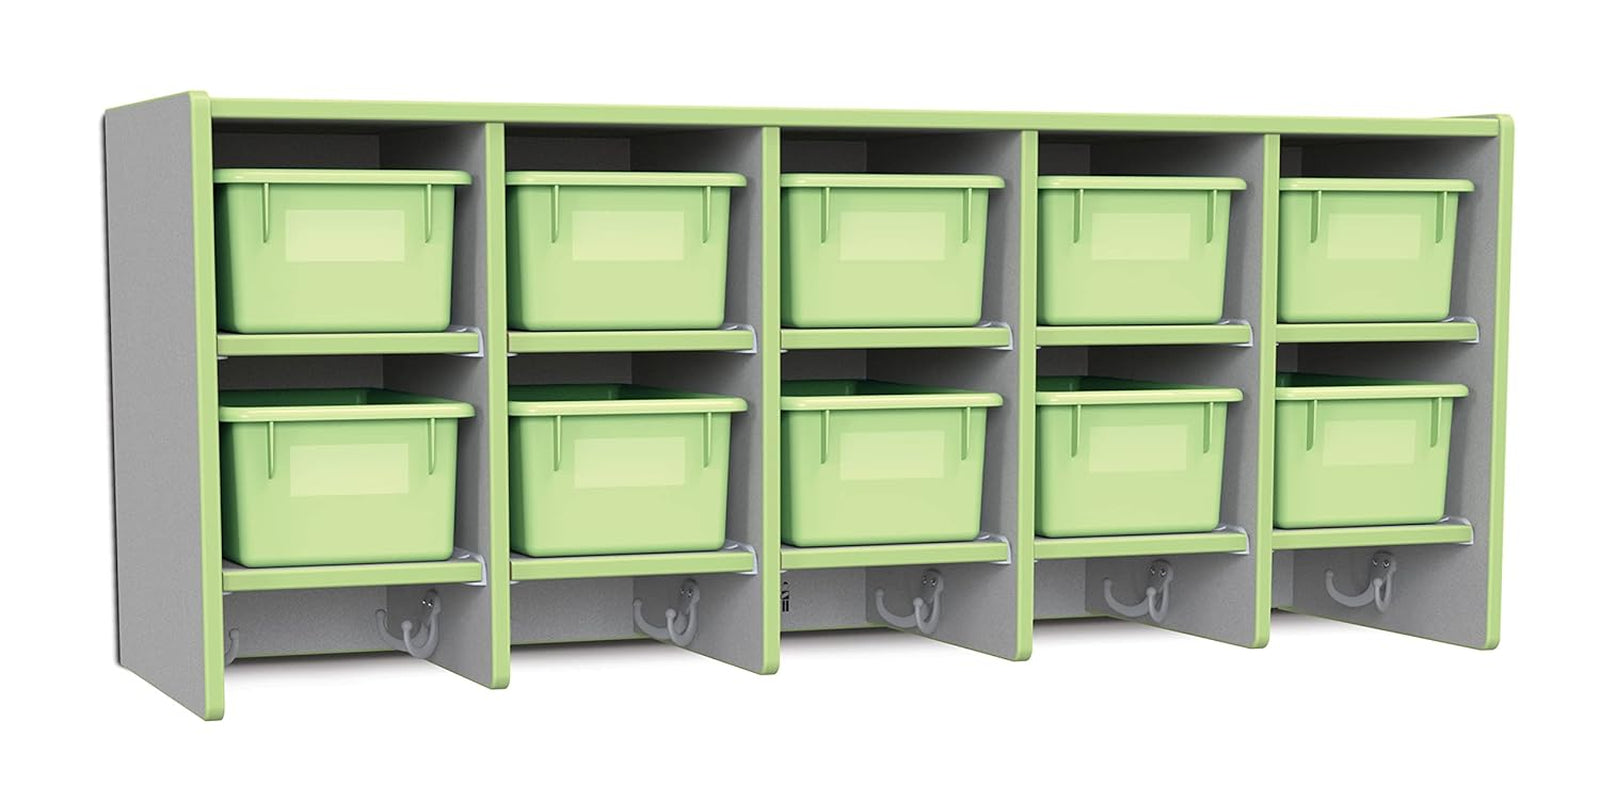 Rainbow Accents 0771JC130 10 Section Wall Mount Coat Locker - with Trays - Key Lime Green